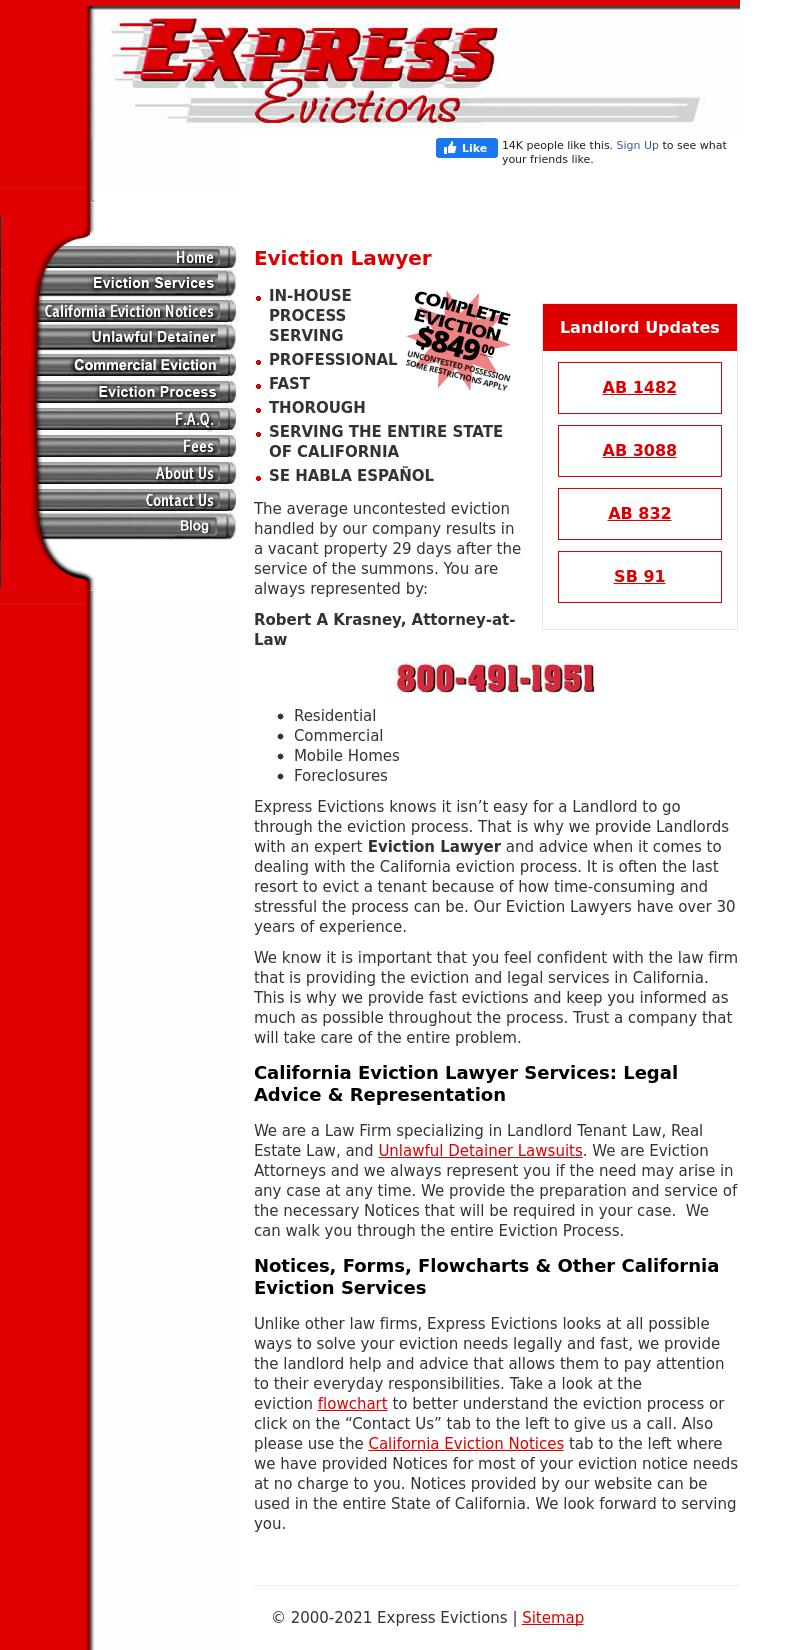 Express Evictions - Turlock CA Lawyers